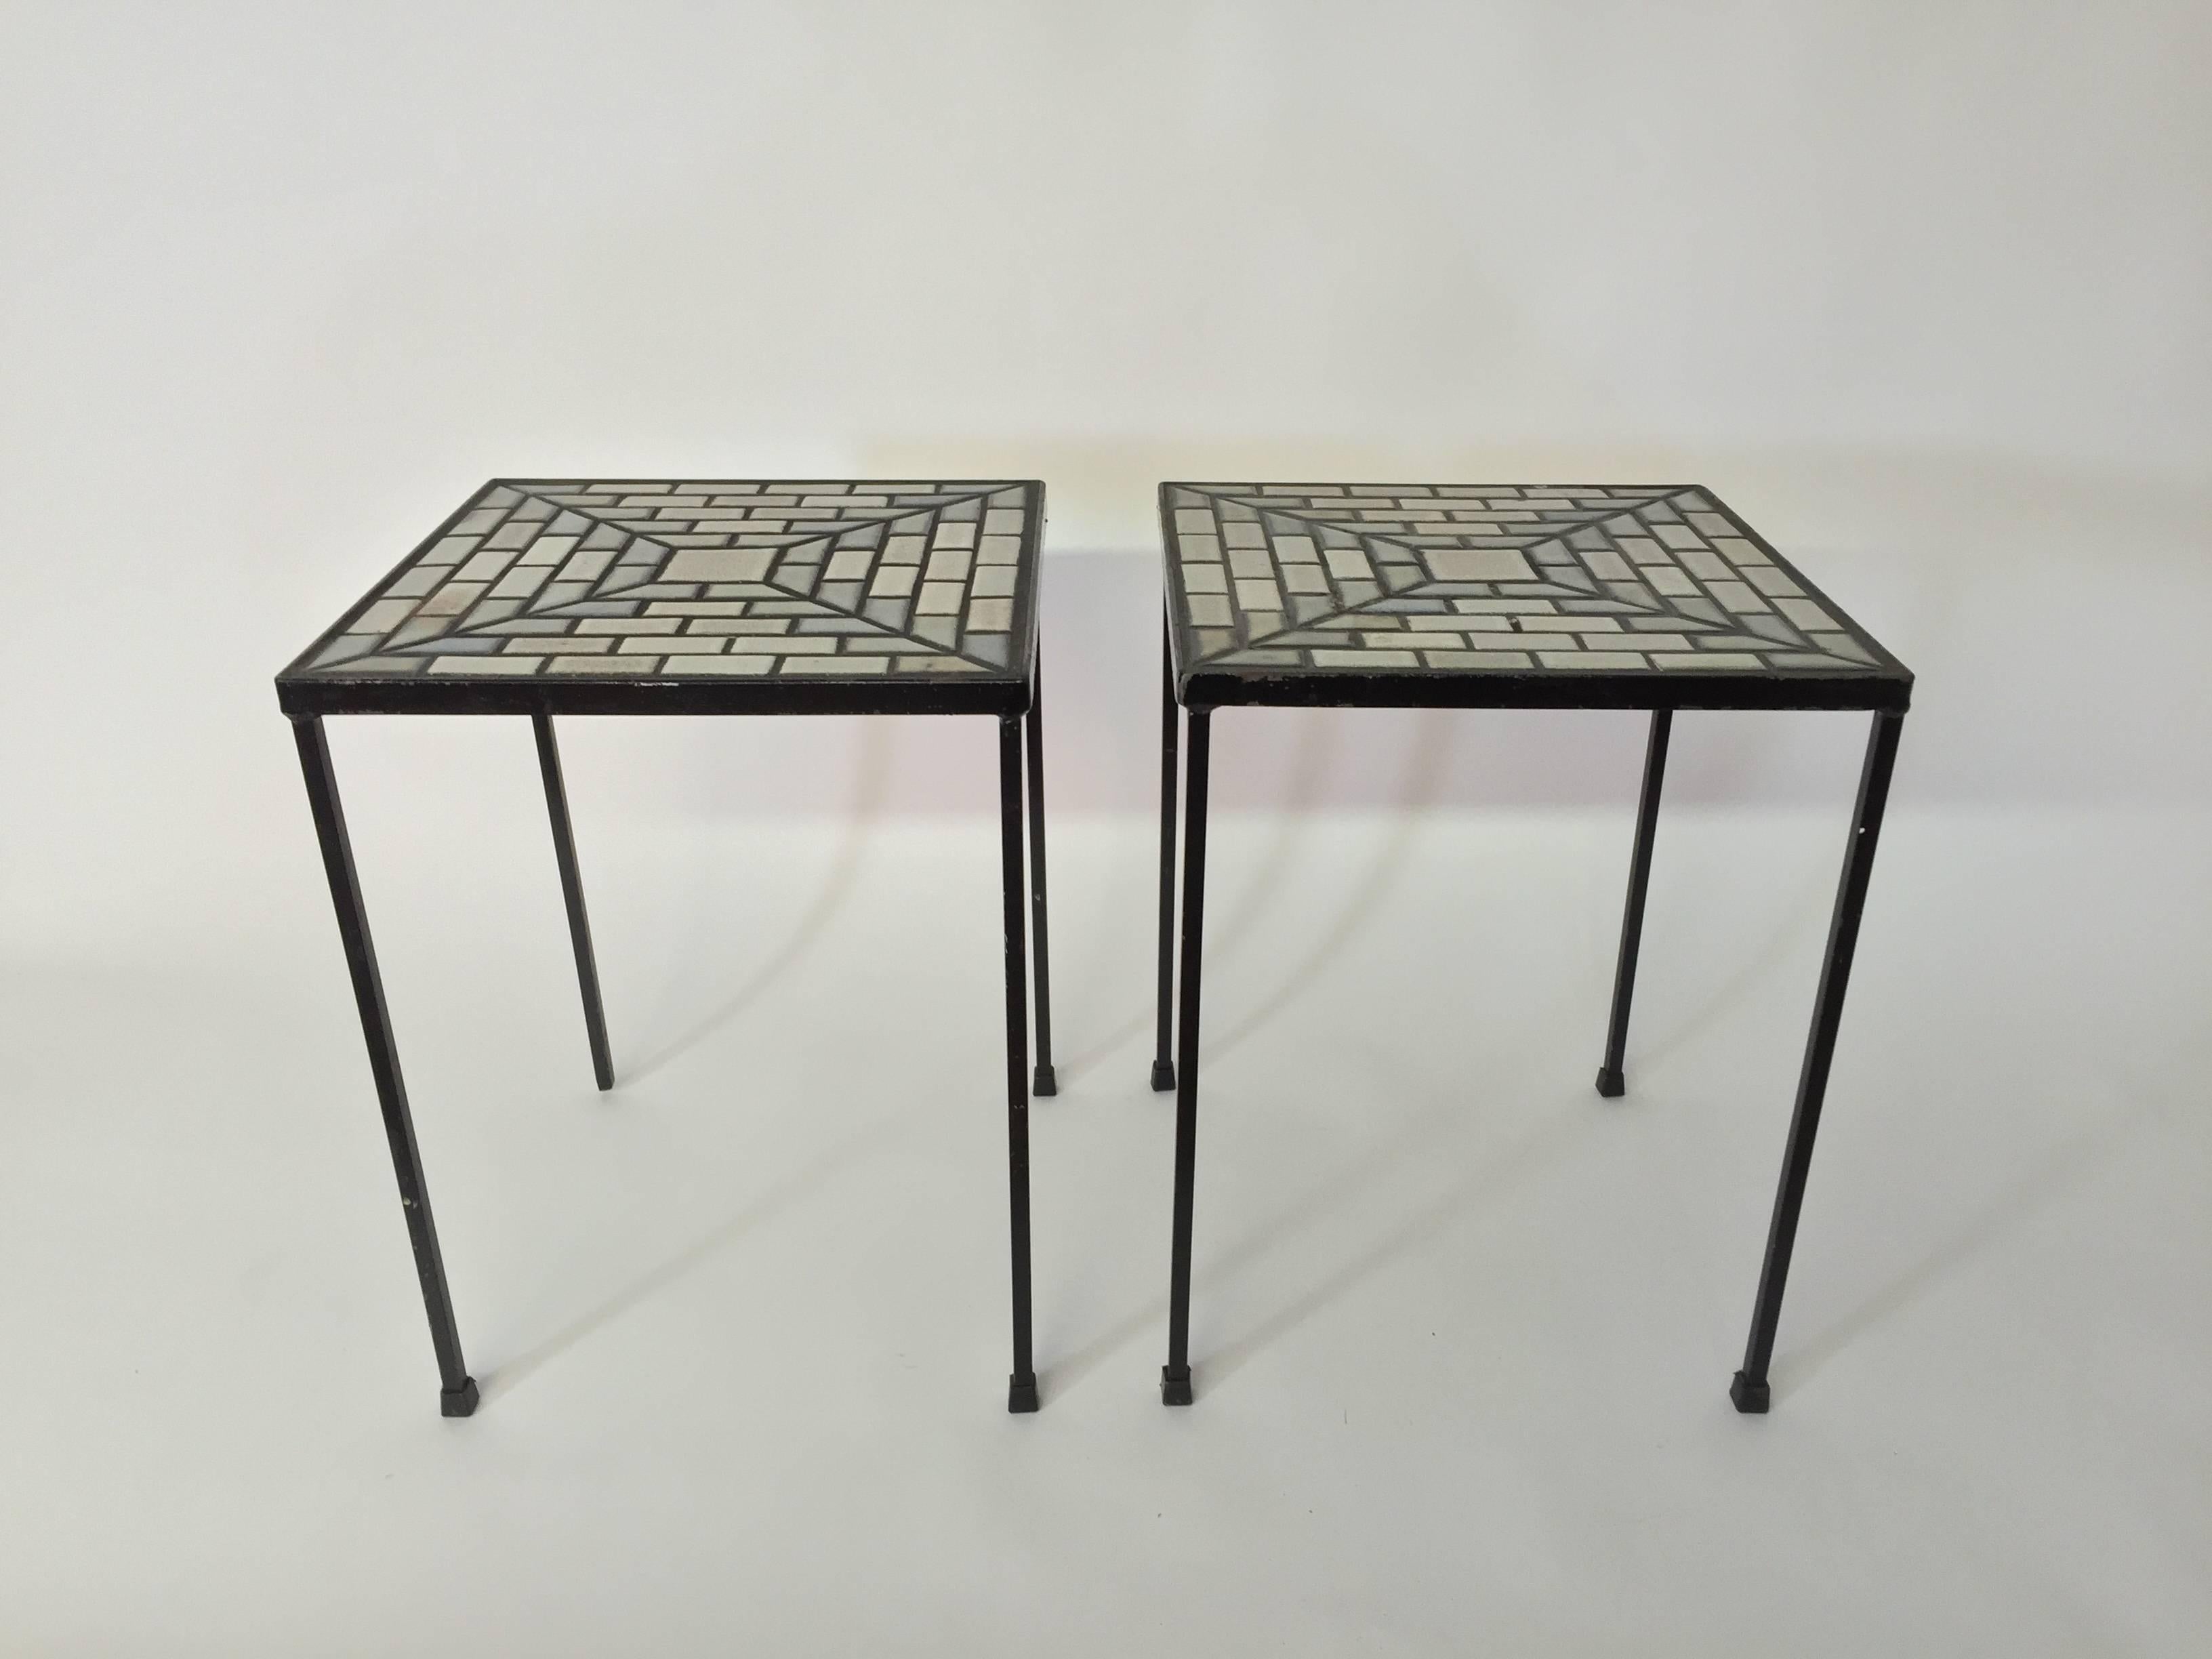 Mosaic Pair of Iron and Tile Top End Tables in the Style of Martz